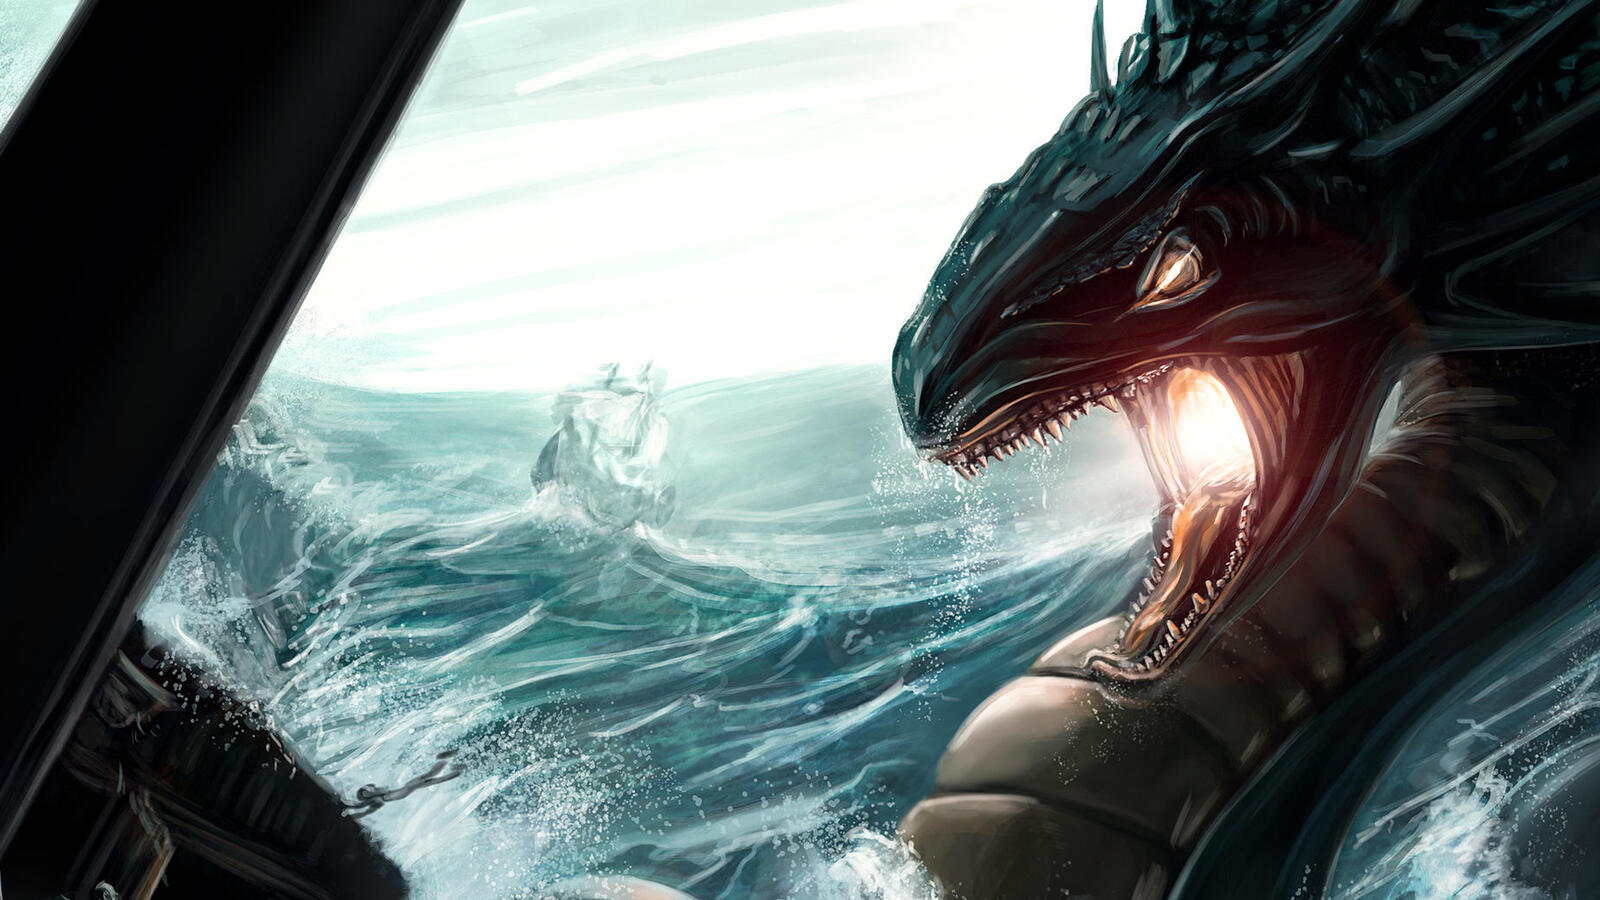 Free photo Rendering of the sea monster picture.